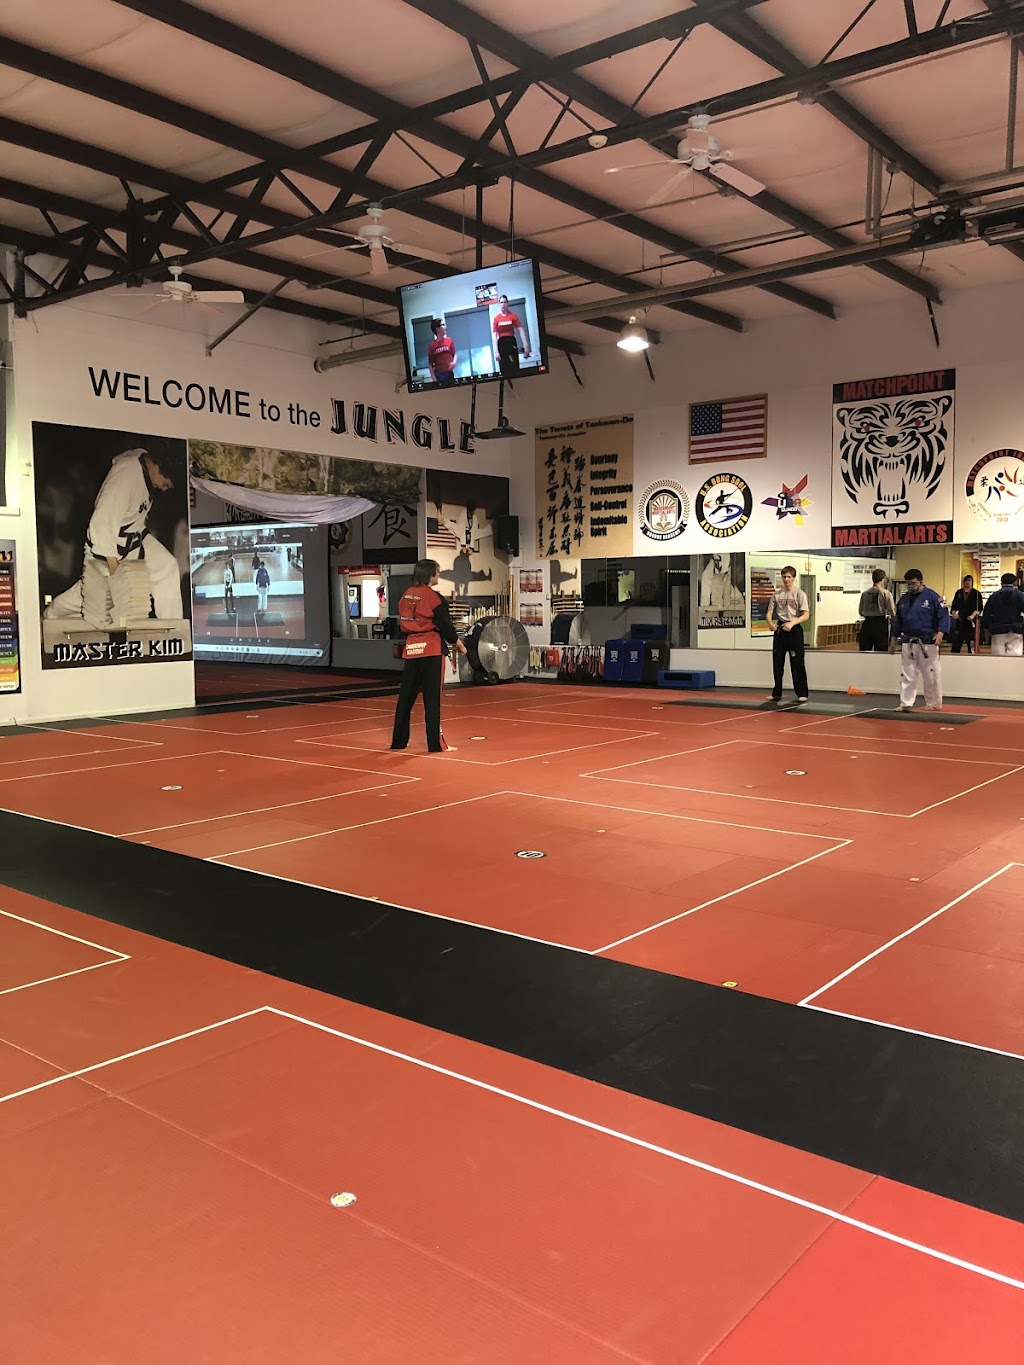 Matchpoint Martial Arts | 1736 W 130th St Unit 130, Brunswick, OH 44212, USA | Phone: (330) 225-0900